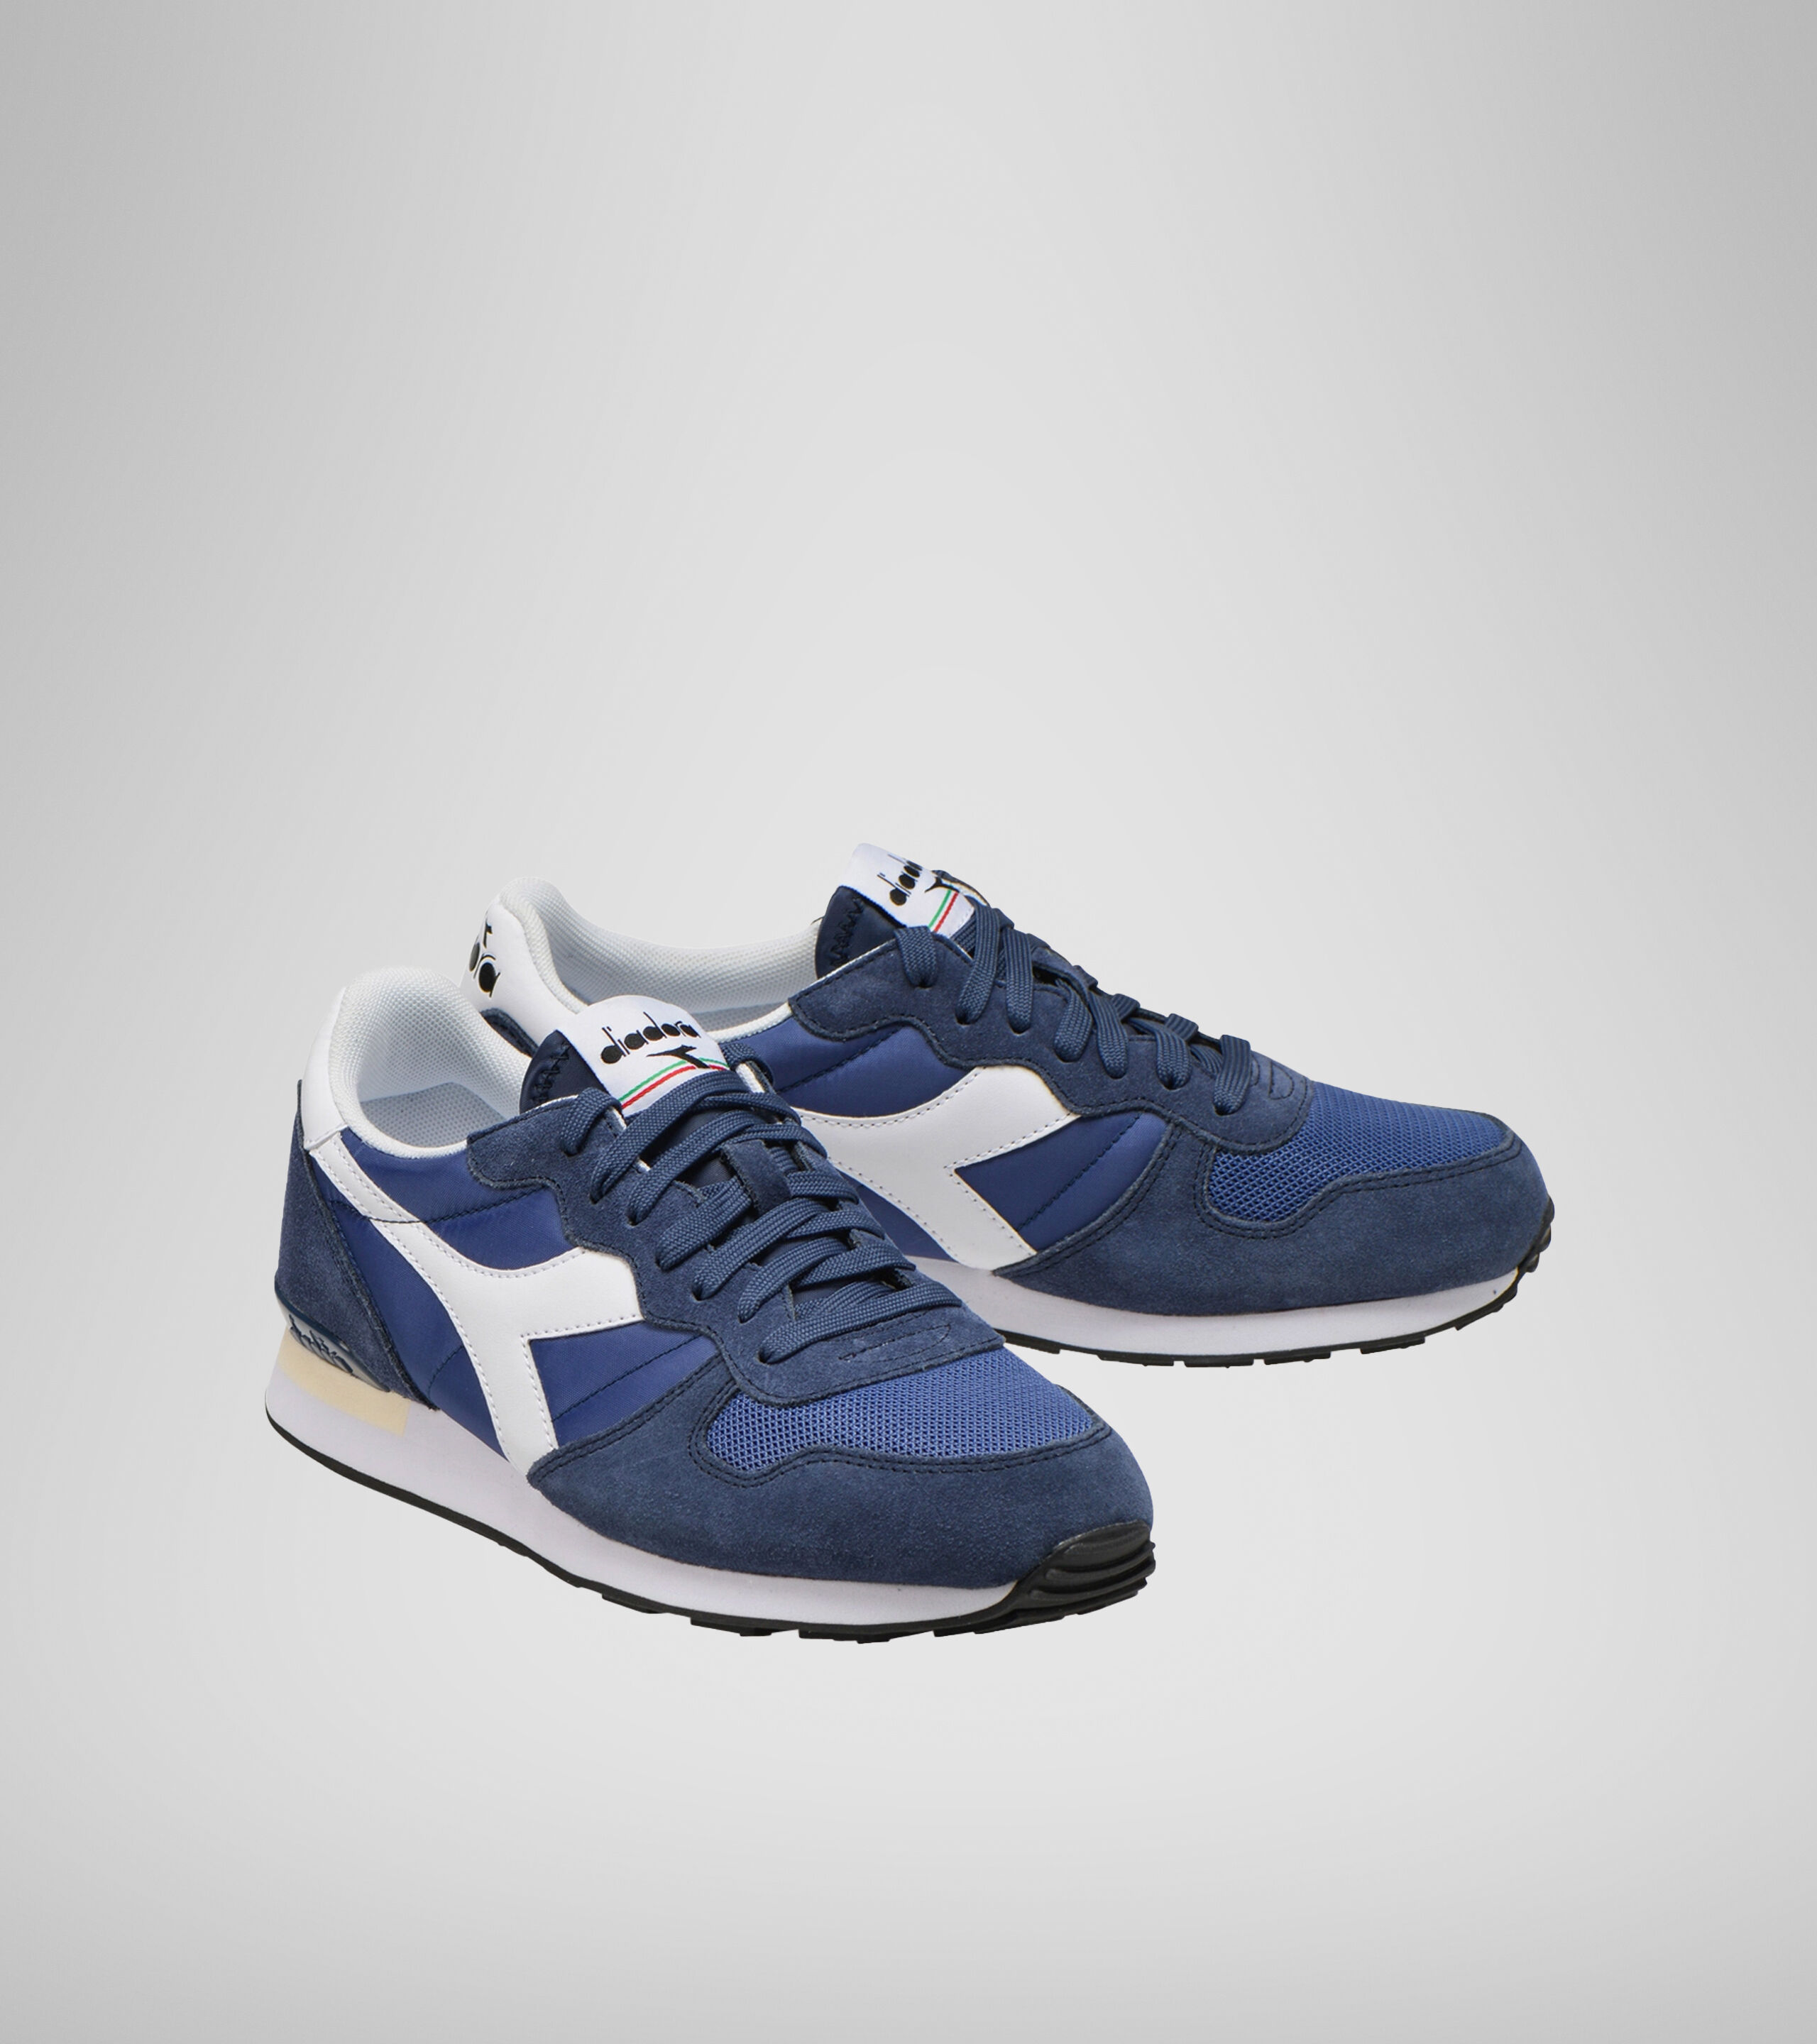 Details about   Diadora Camaro Grey Navy Mens Suede Trainers Shoes 